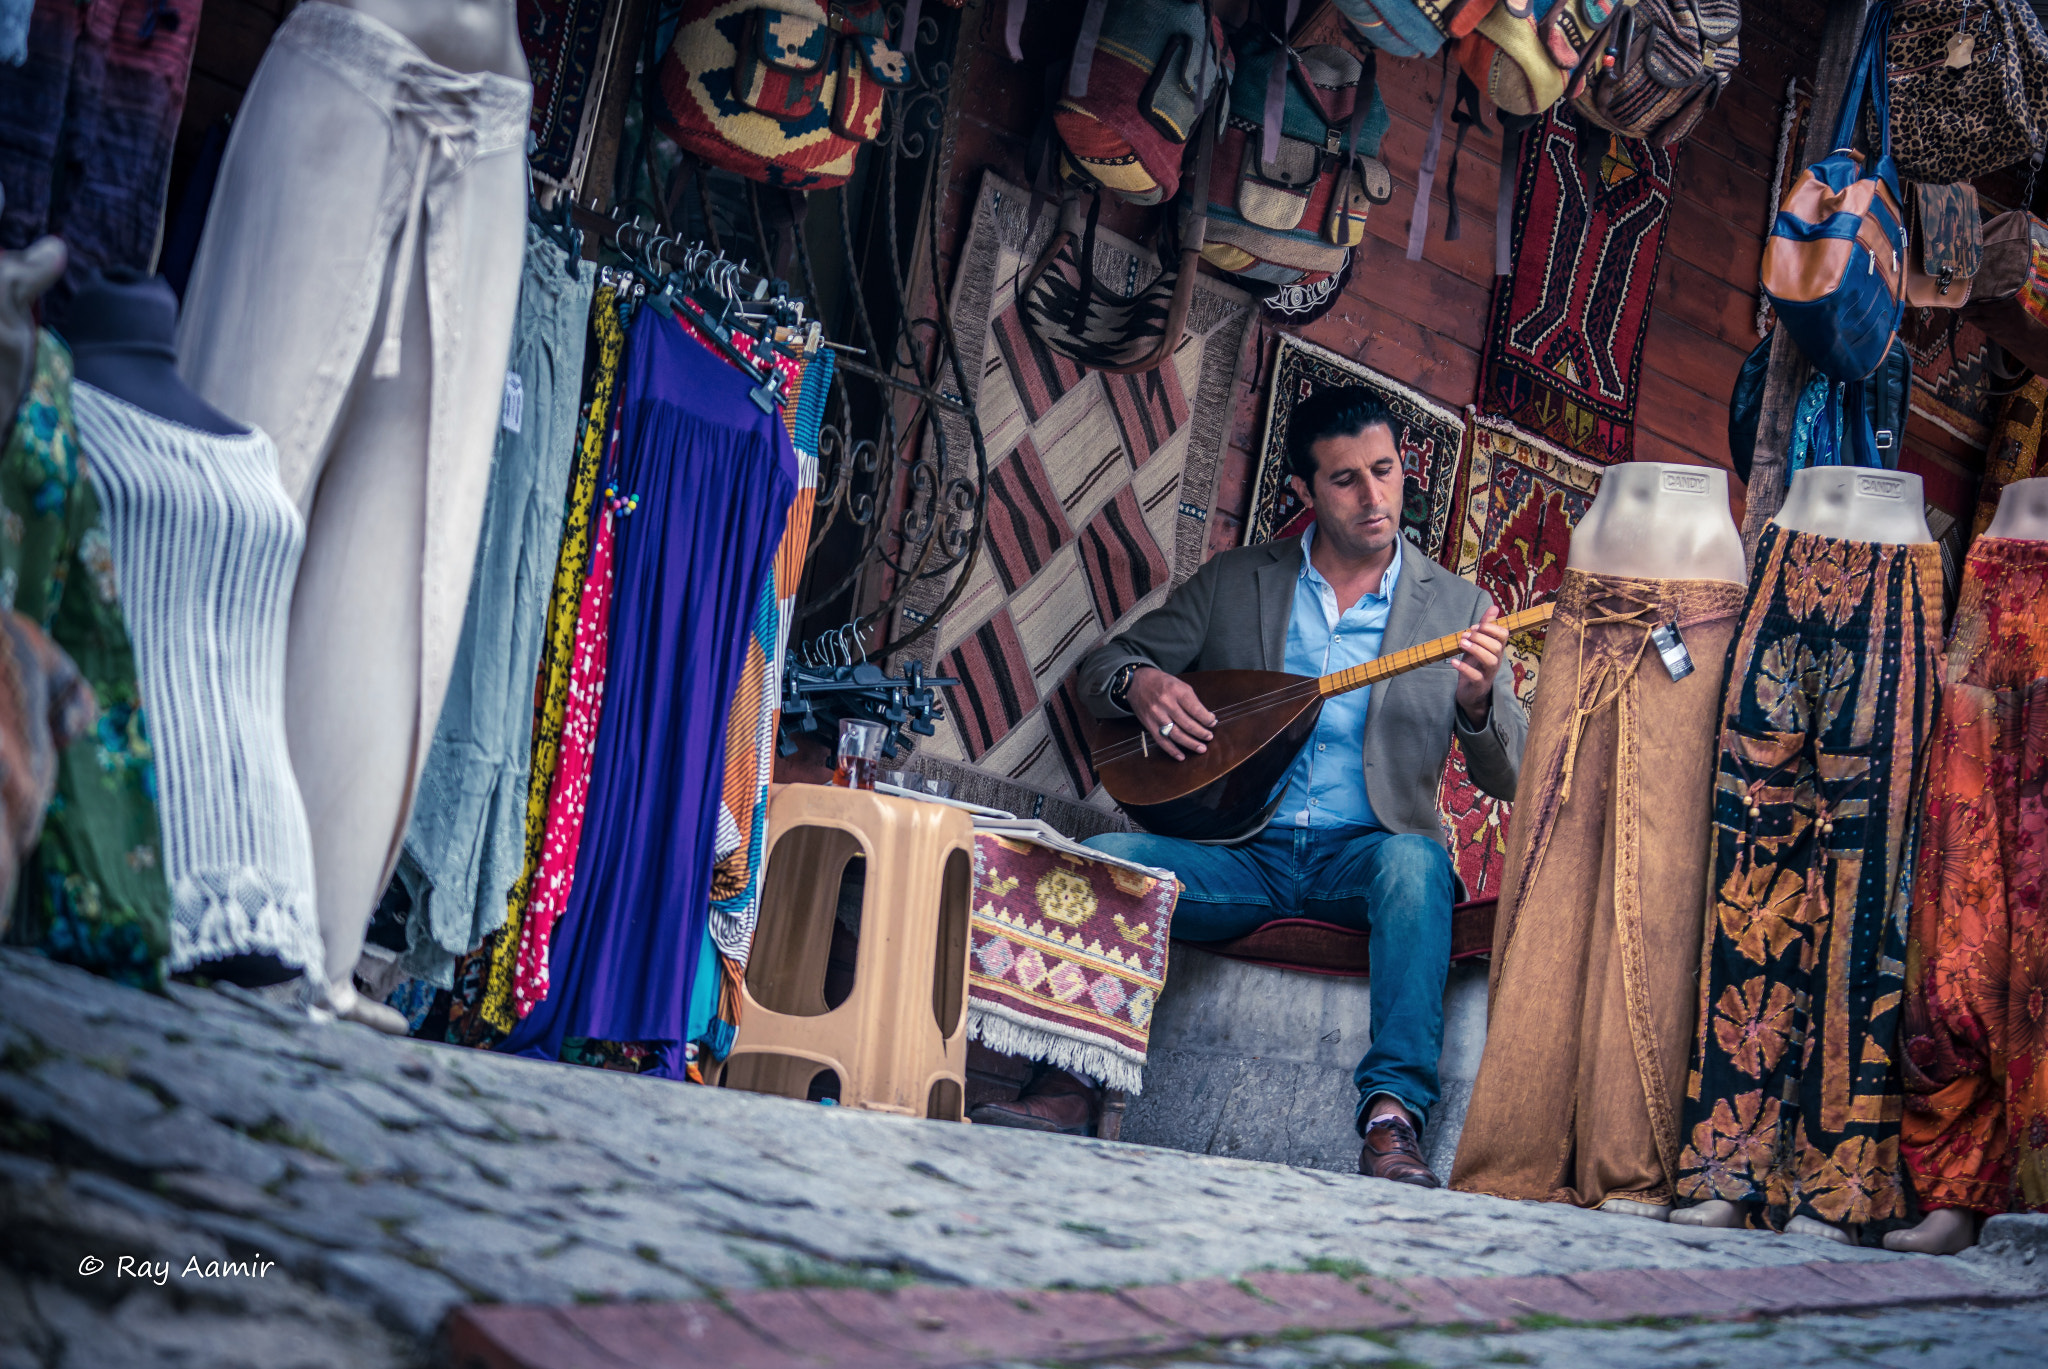 Sony a7R sample photo. Baglama player in istanbul photography